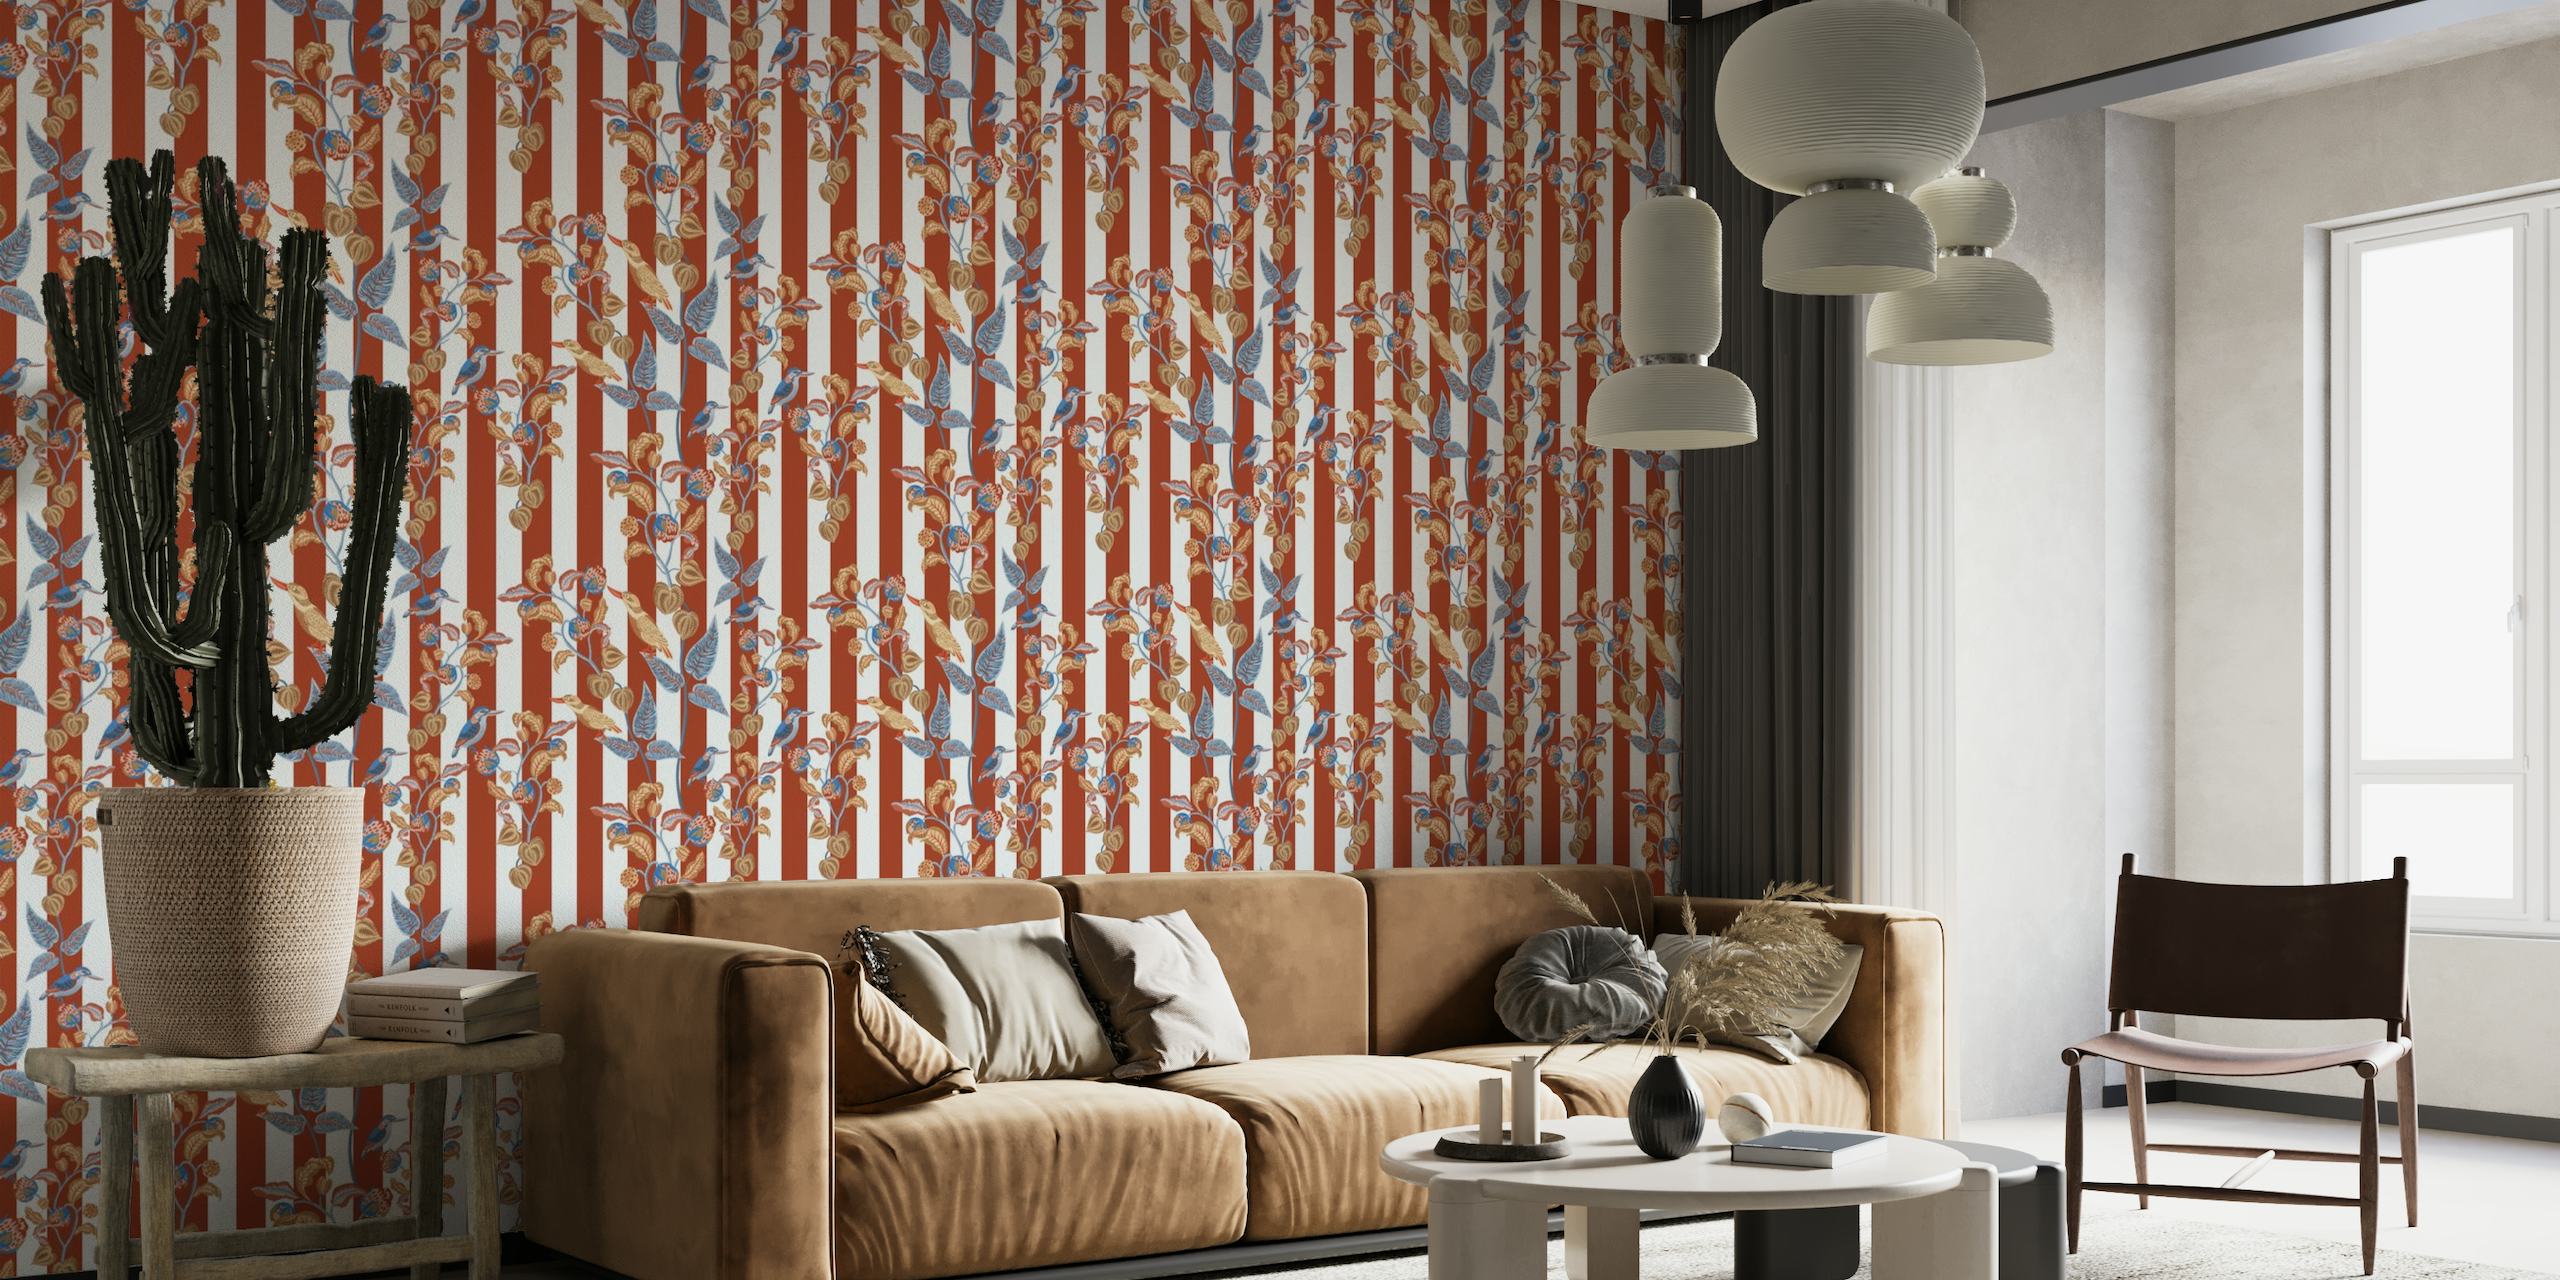 Wall mural with colorful birds and striped background